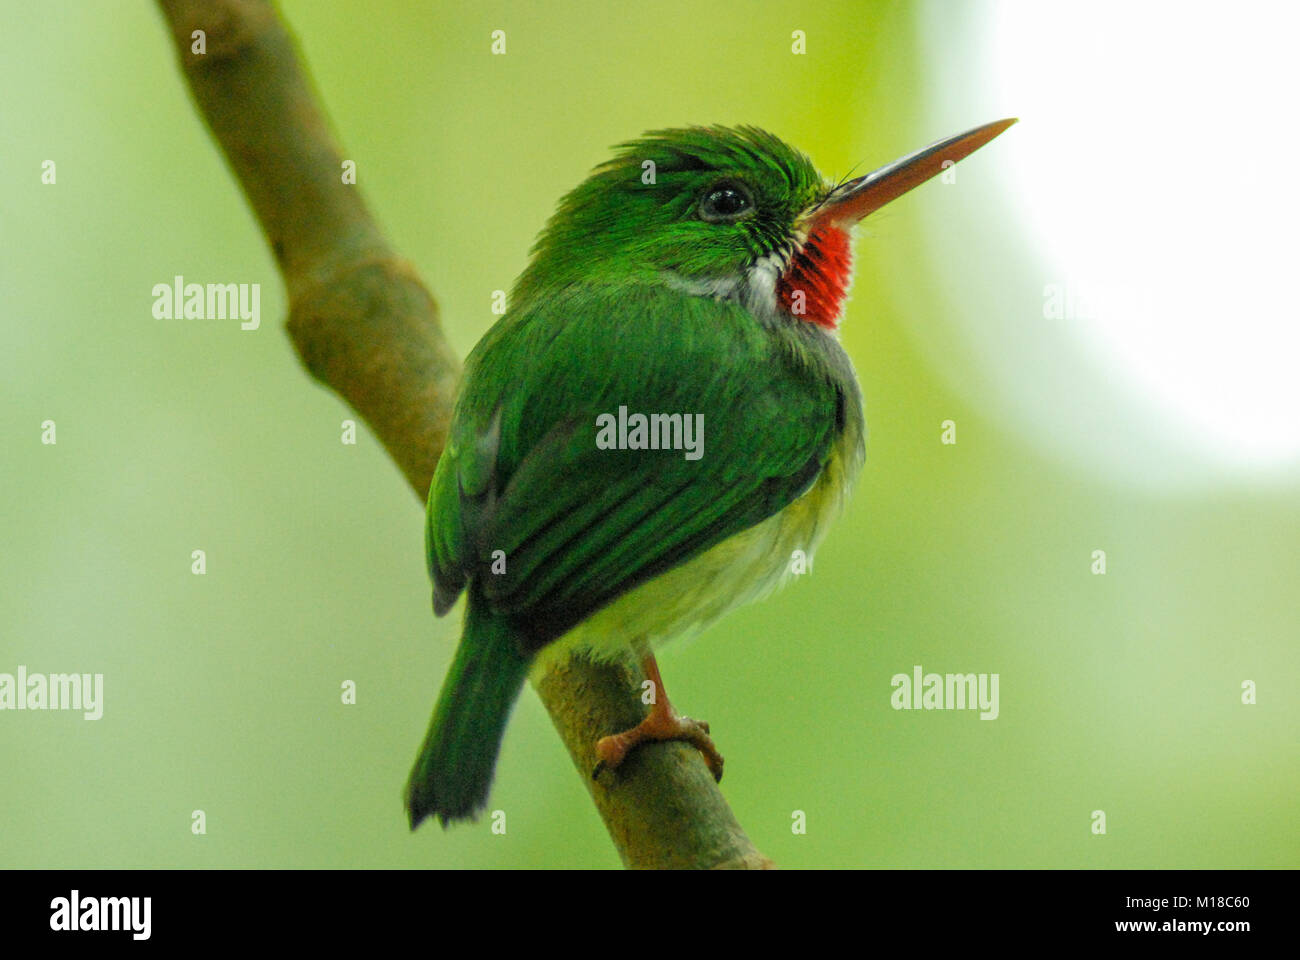 Puerto Rican tody (Todus mexicanus) in the El Yunque National Rainforest Stock Photo